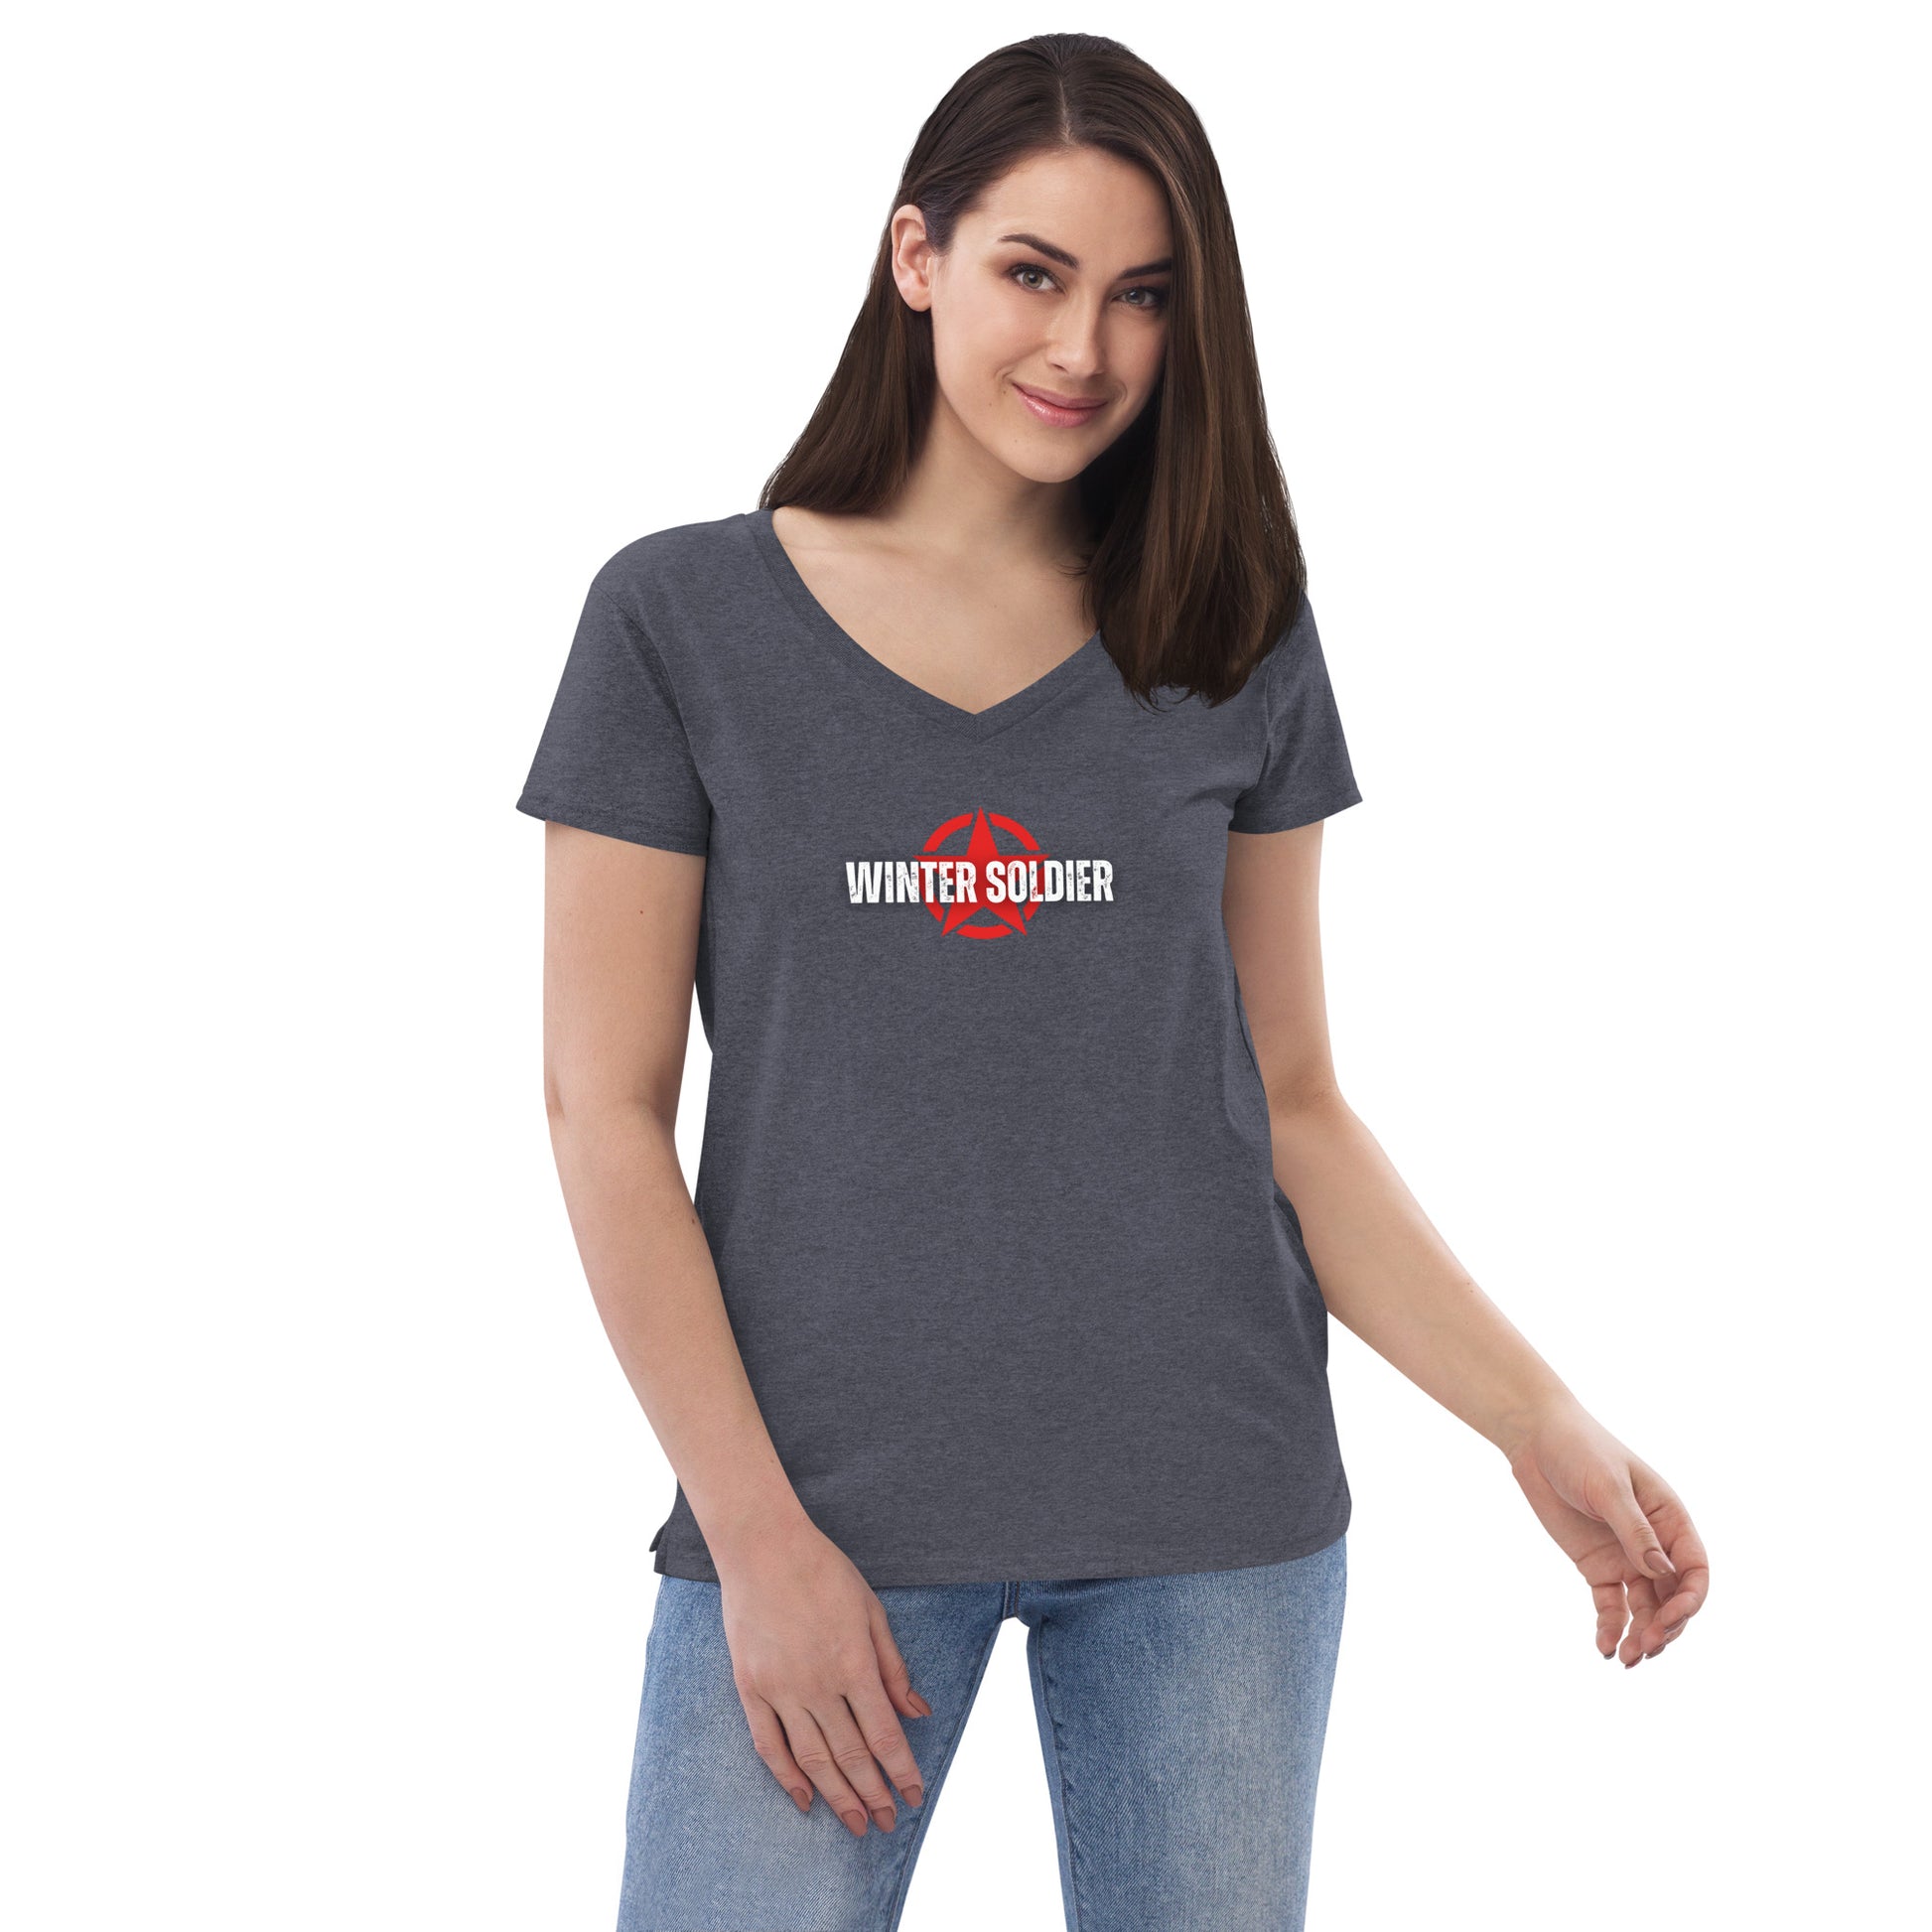 a woman wearing a t - shirt that says winter soldier